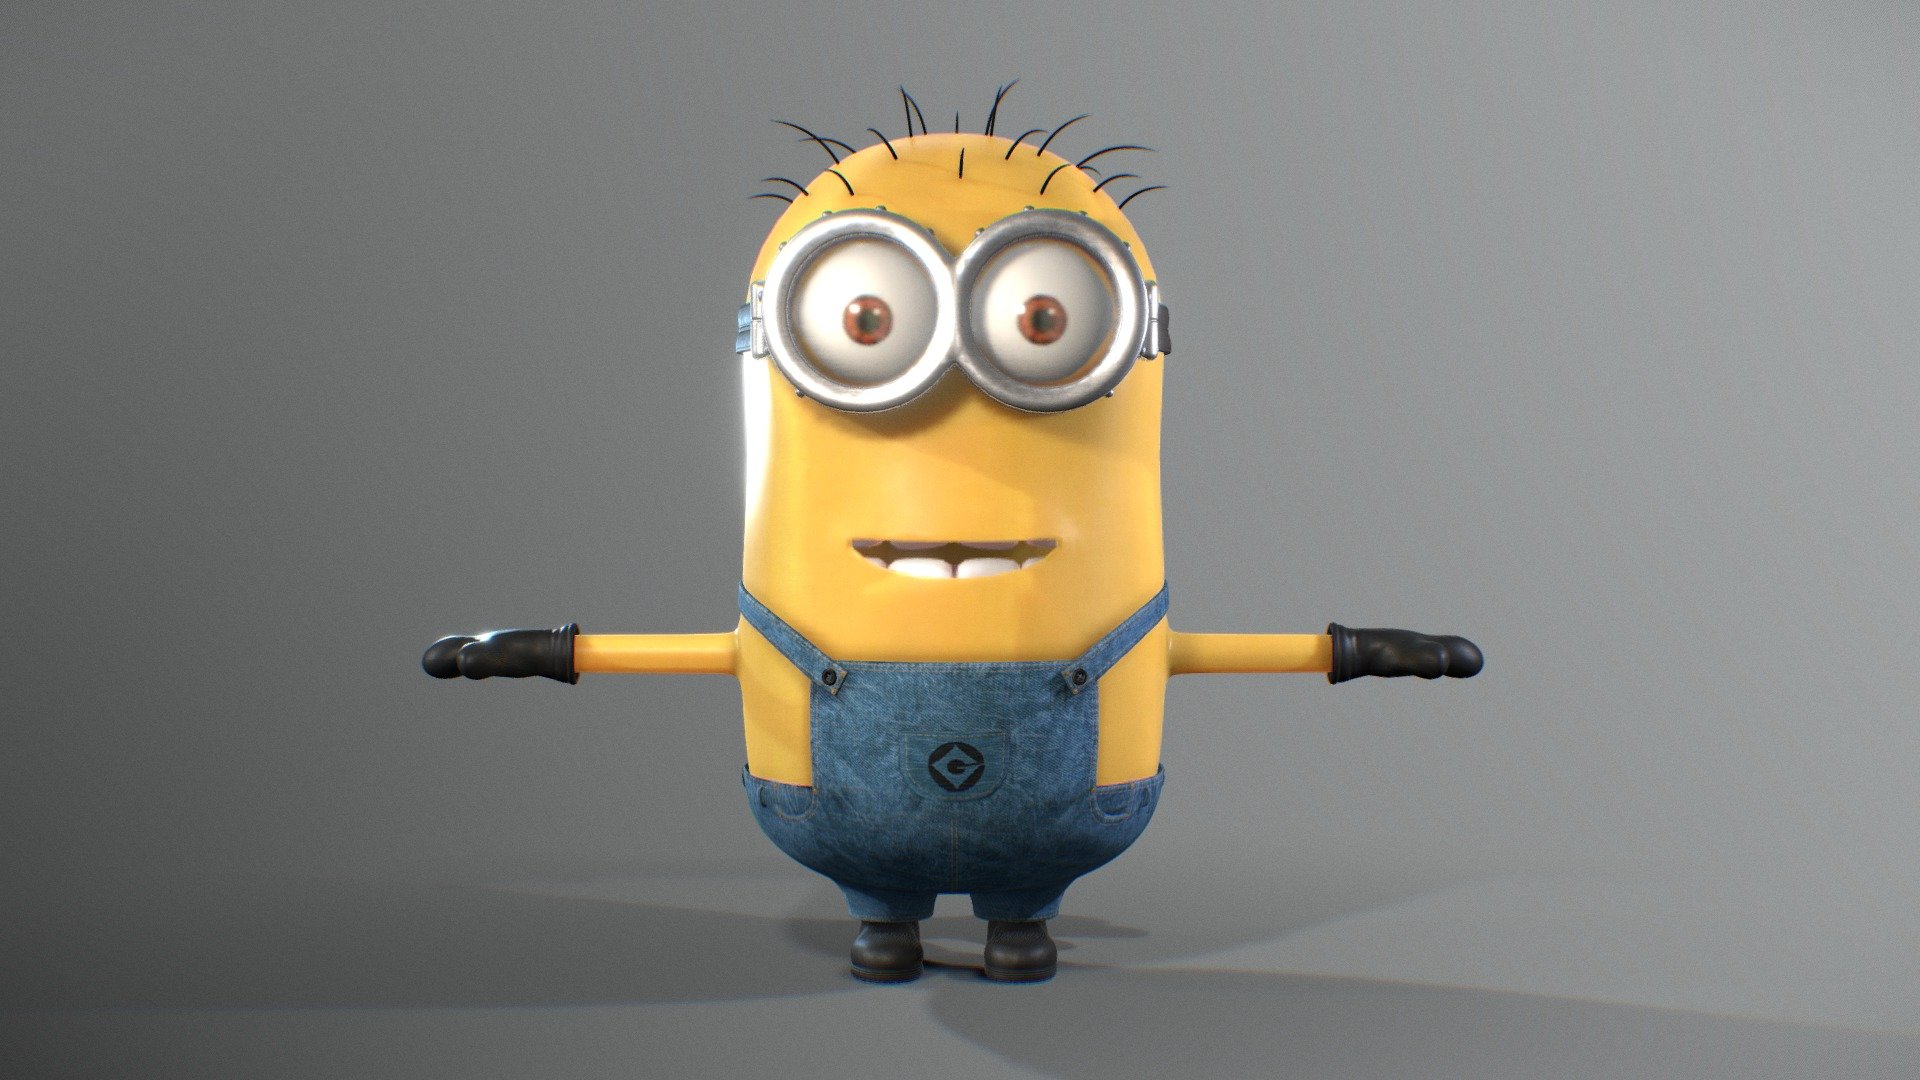 This is a 3d model of a MINION named TOM. It is created character in Blender and textured in Substance Painter. This model is in real proportions.

My YouTube video link for this character- https://youtu.be/XB8vX6WpxwE

High resolutions of PBR textures are available to download,

Maps include- Base Colour, Roughness, Metallic, Normal 3d model